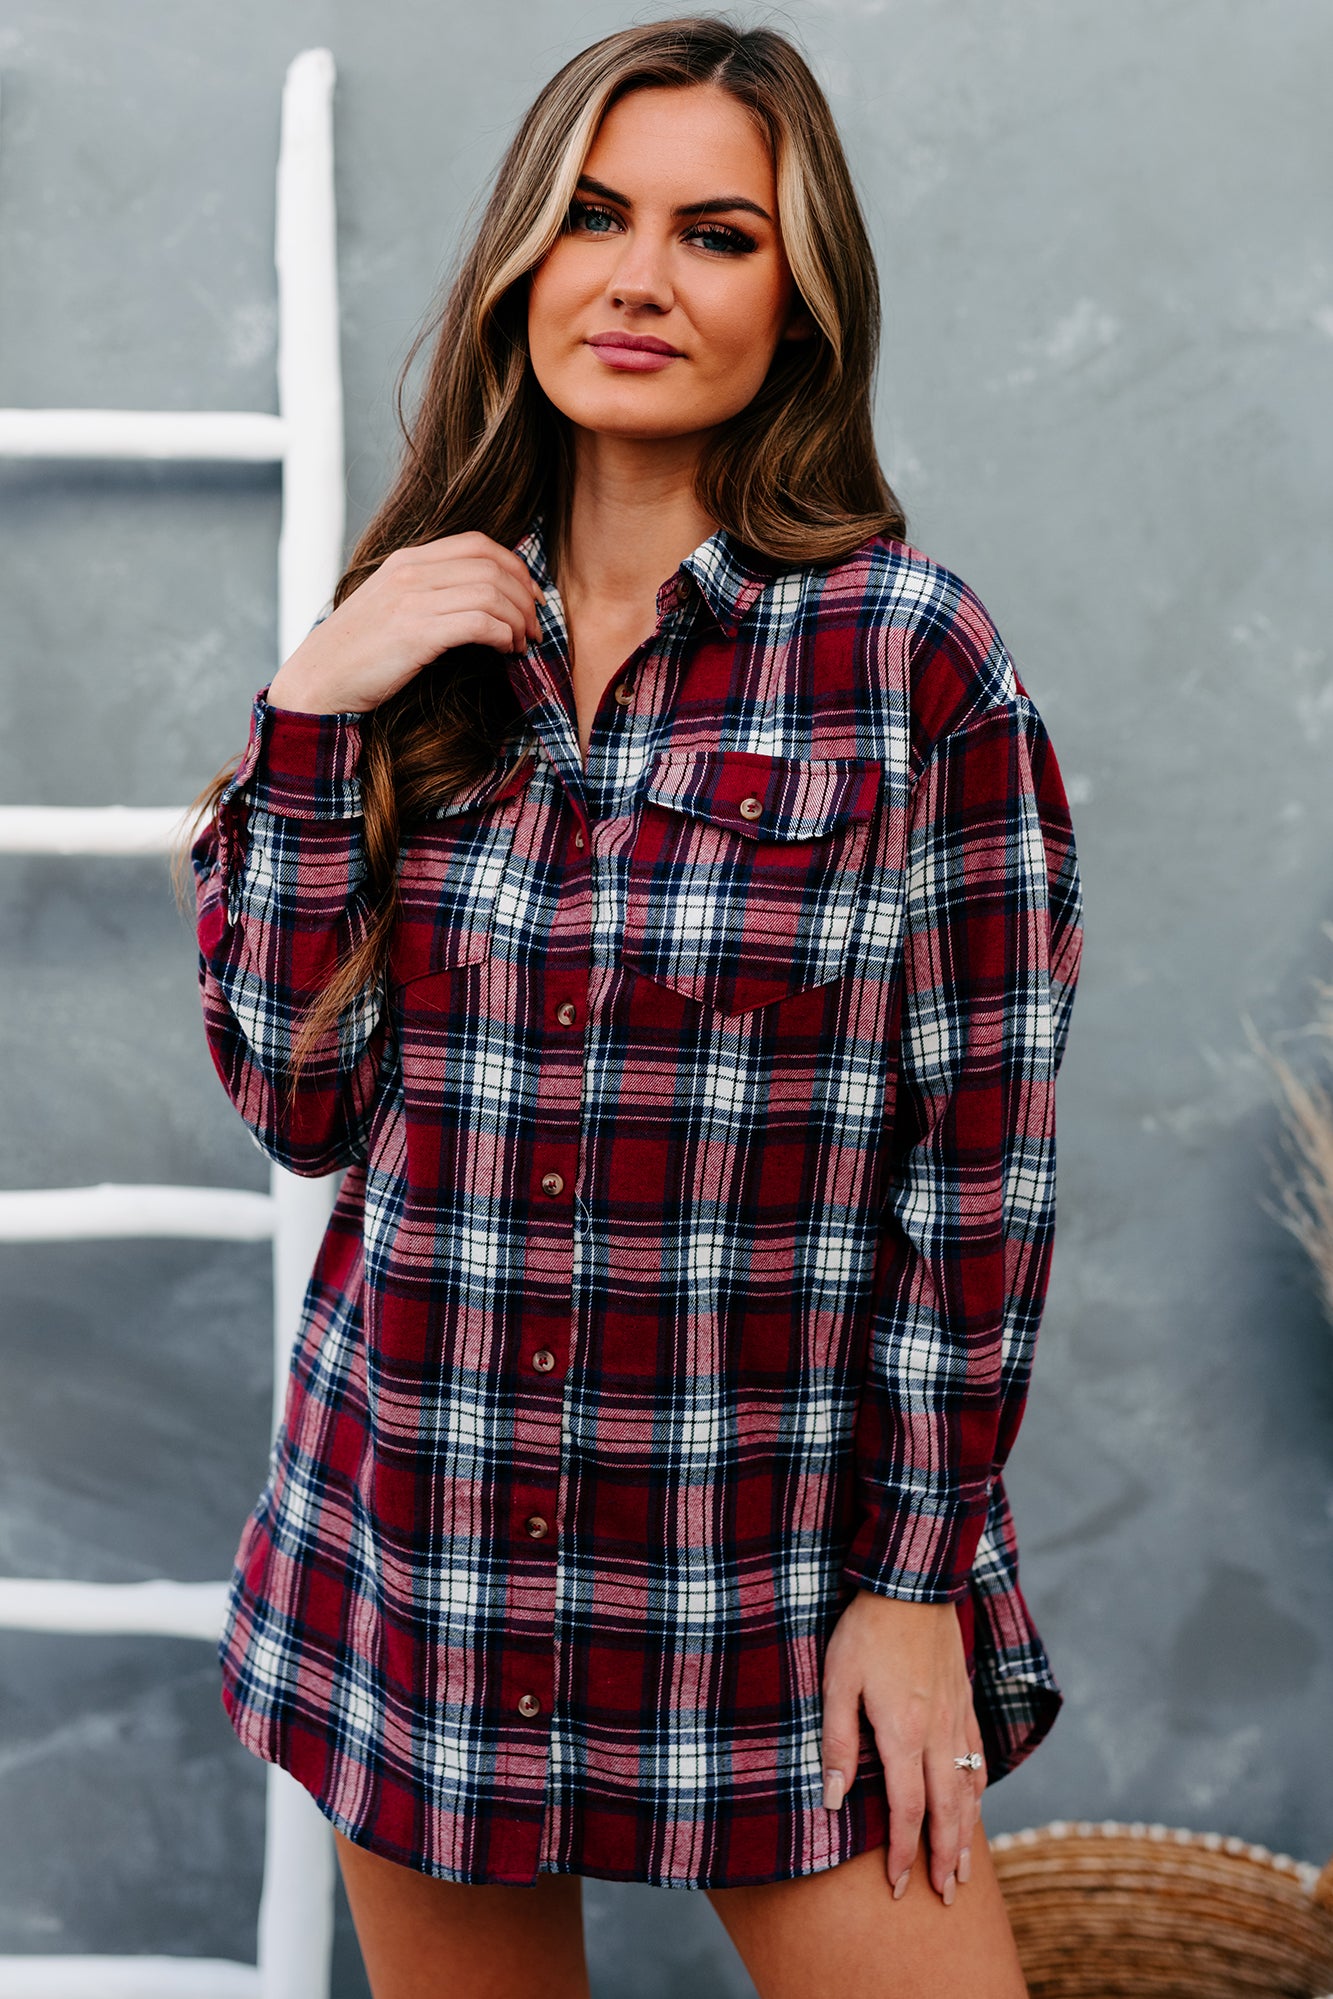 Carefree Confidence Oversized Plaid Button-Down Top (Burgundy) - NanaMacs